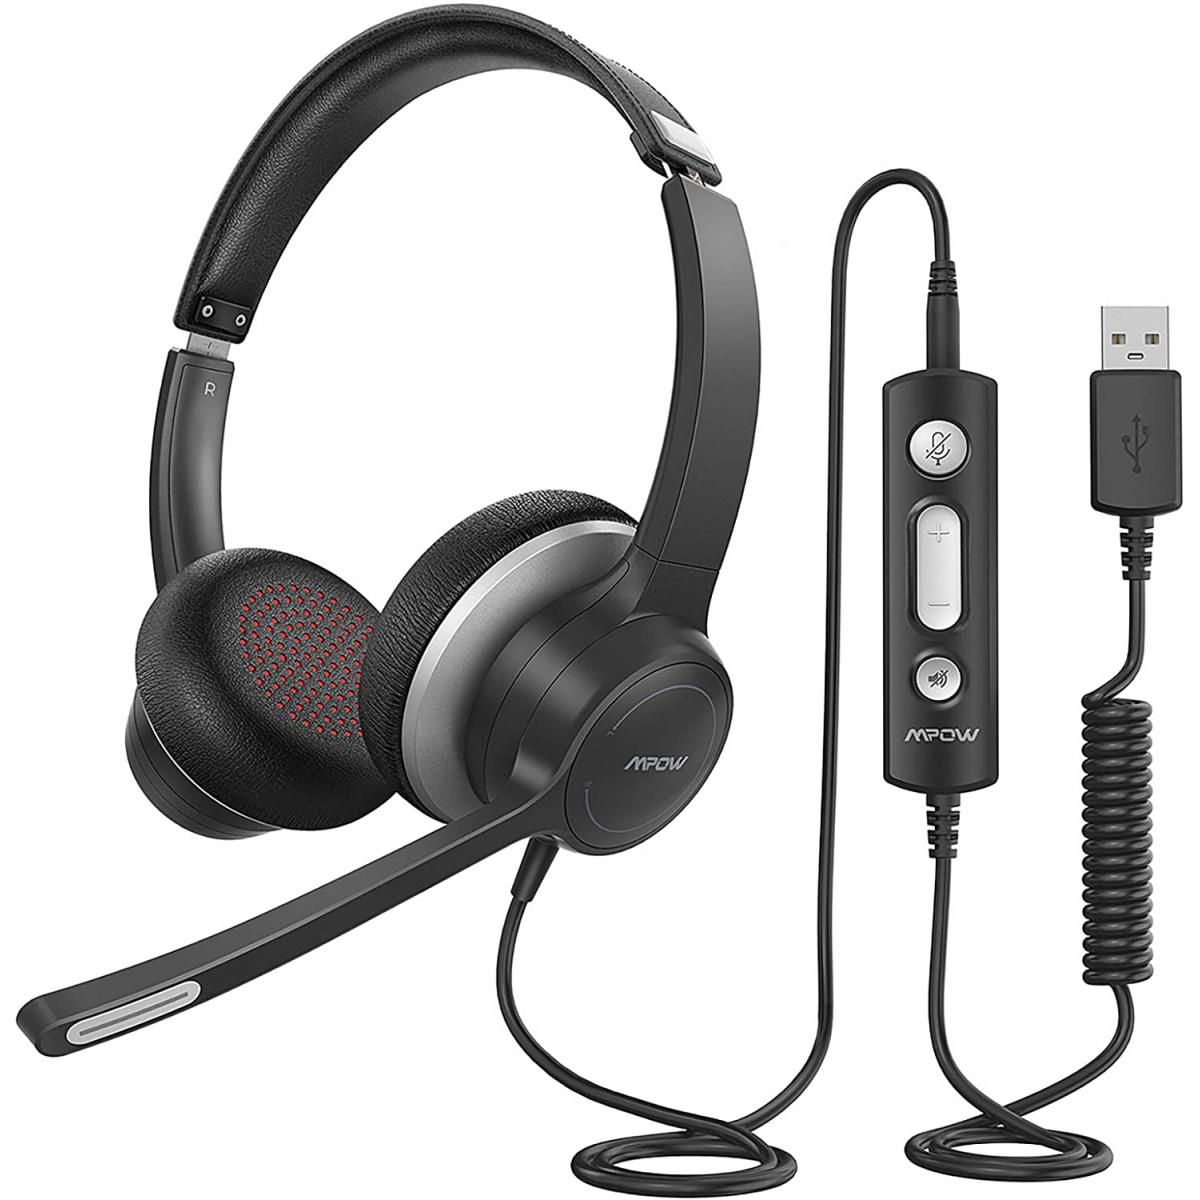 MPOW HC6 Business Wired Headset Black+Silver